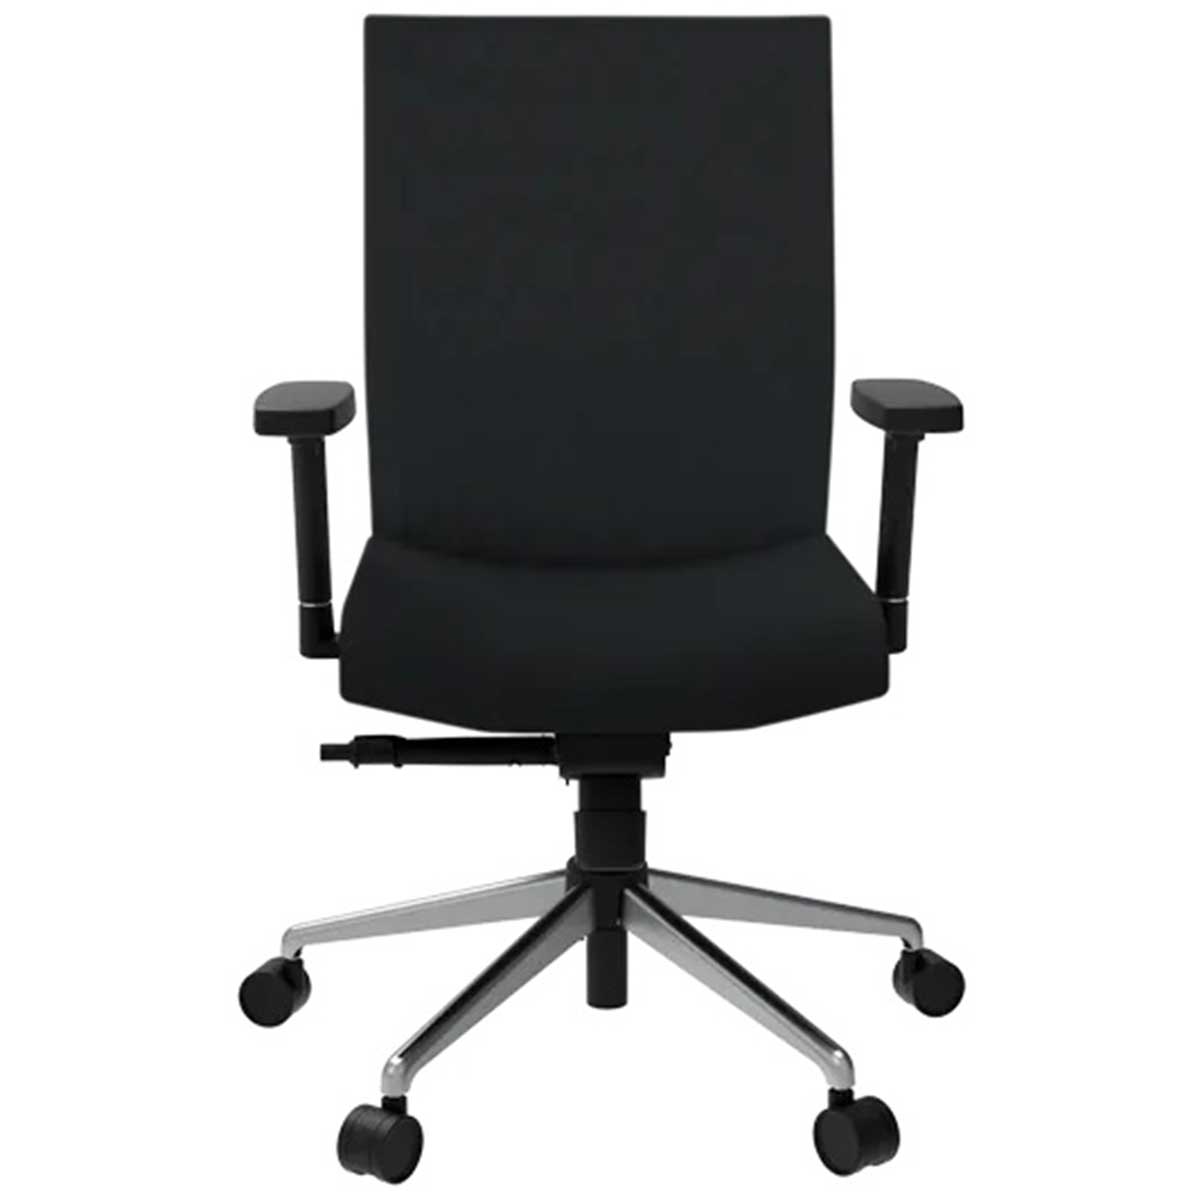 Staff Chair Manufacturers, Suppliers in Faridabad